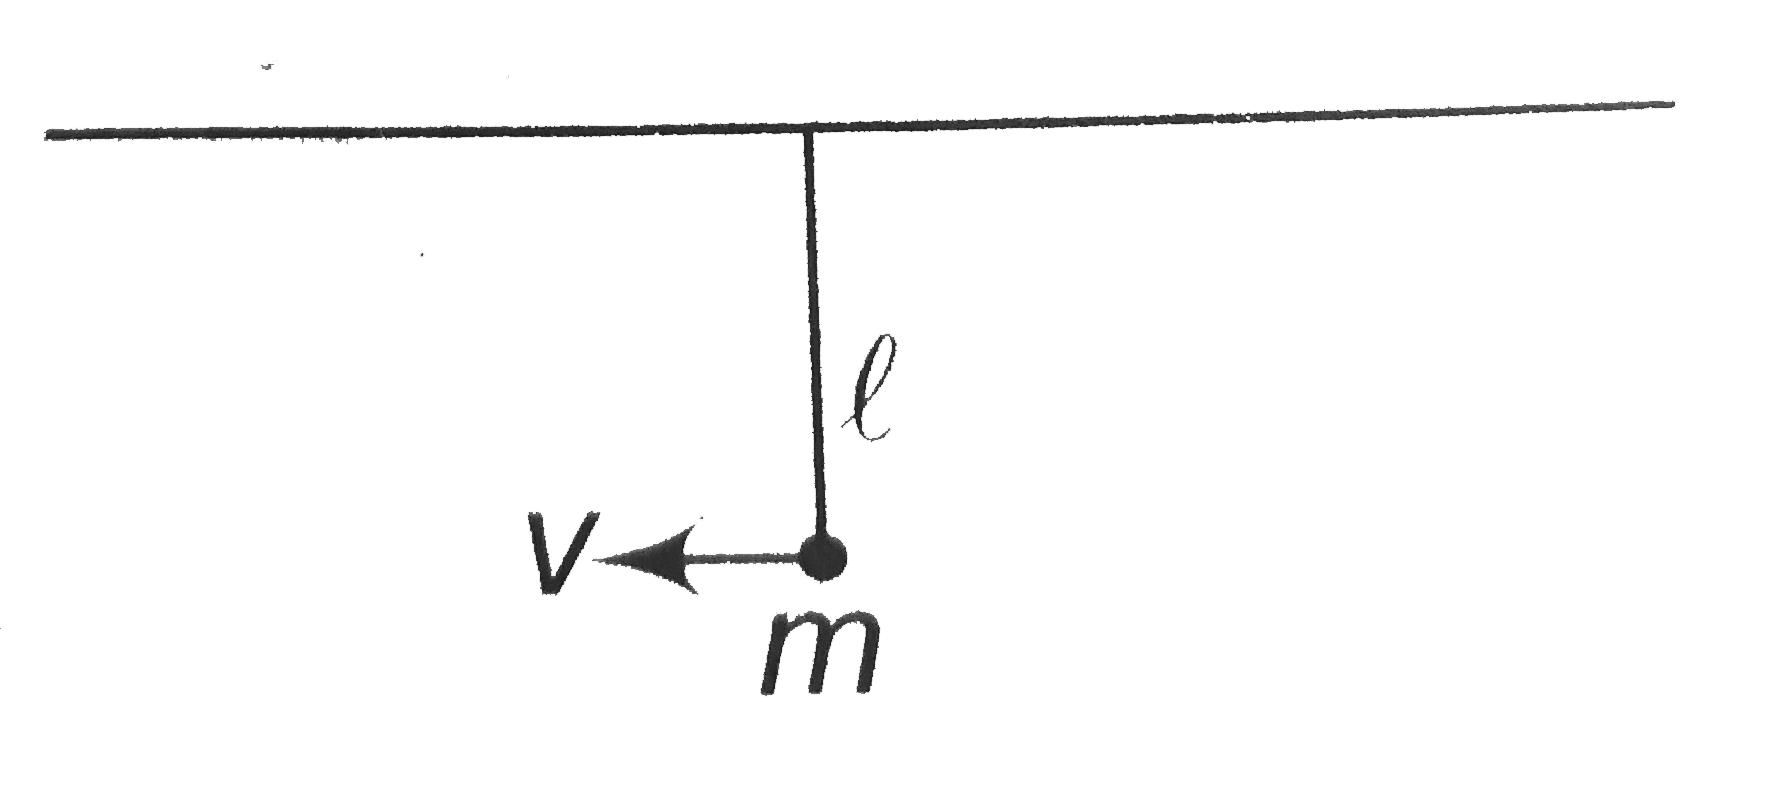 A simple pendulum of length hangs from a horizontal roof as shown in figure. The bob of mass m is given an initial horizontal velocity of magnitude sqrt(5 gl) as shown in figure. The coefficient of restitution e = (1)/(2). After how many collisions the bob shall no long come into constant with the horizonrtal roof?